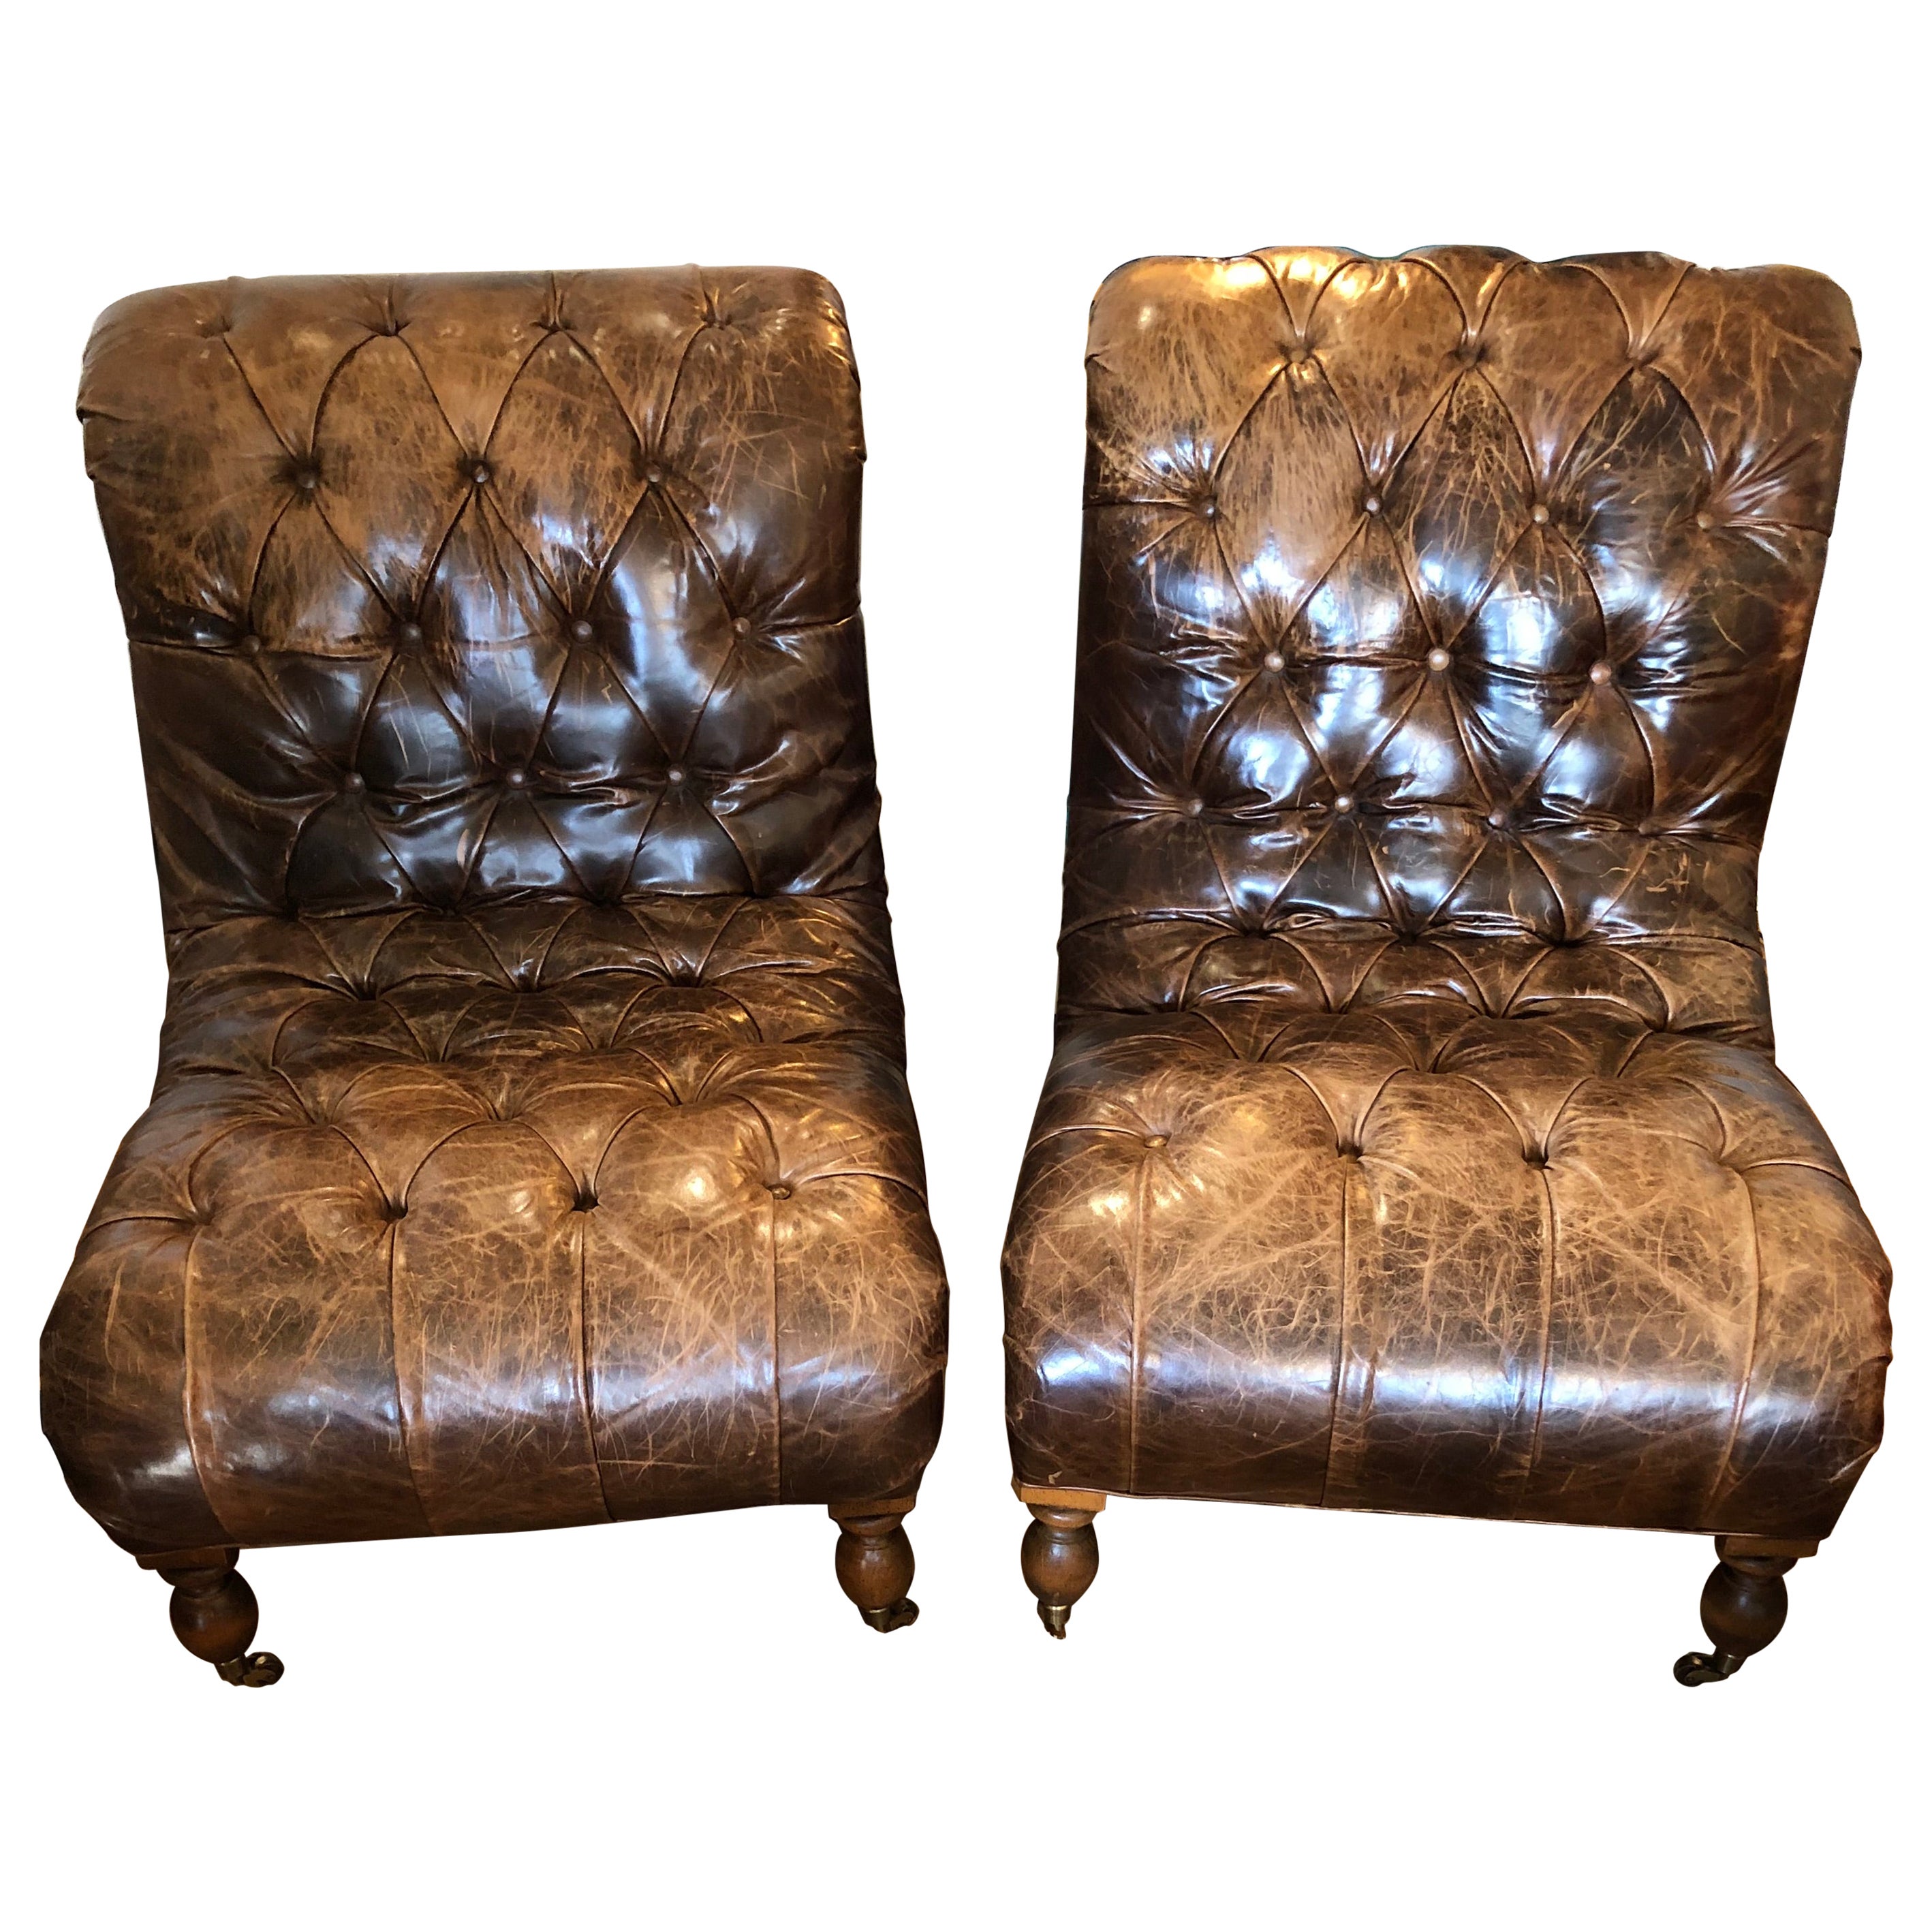 Sumptuous Distressed Tobacco Brown Leather Pair of Mitchell Gold Club Chairs